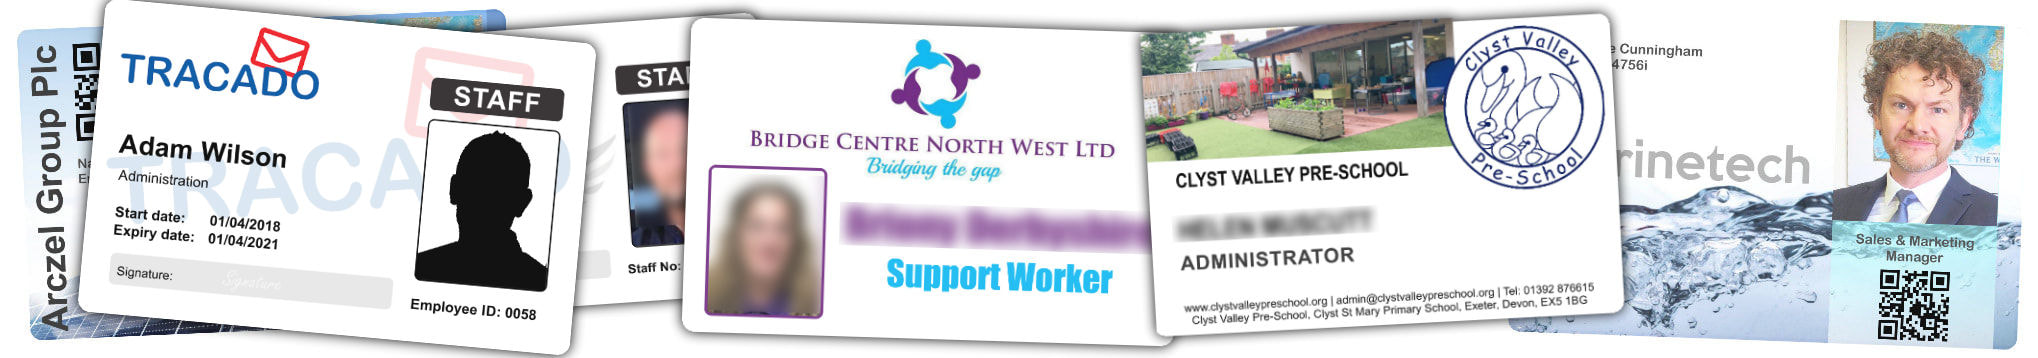 Birkenhead examples of staff photo ID cards | samples of employee Identity card printing | Workers ID cards printed in 